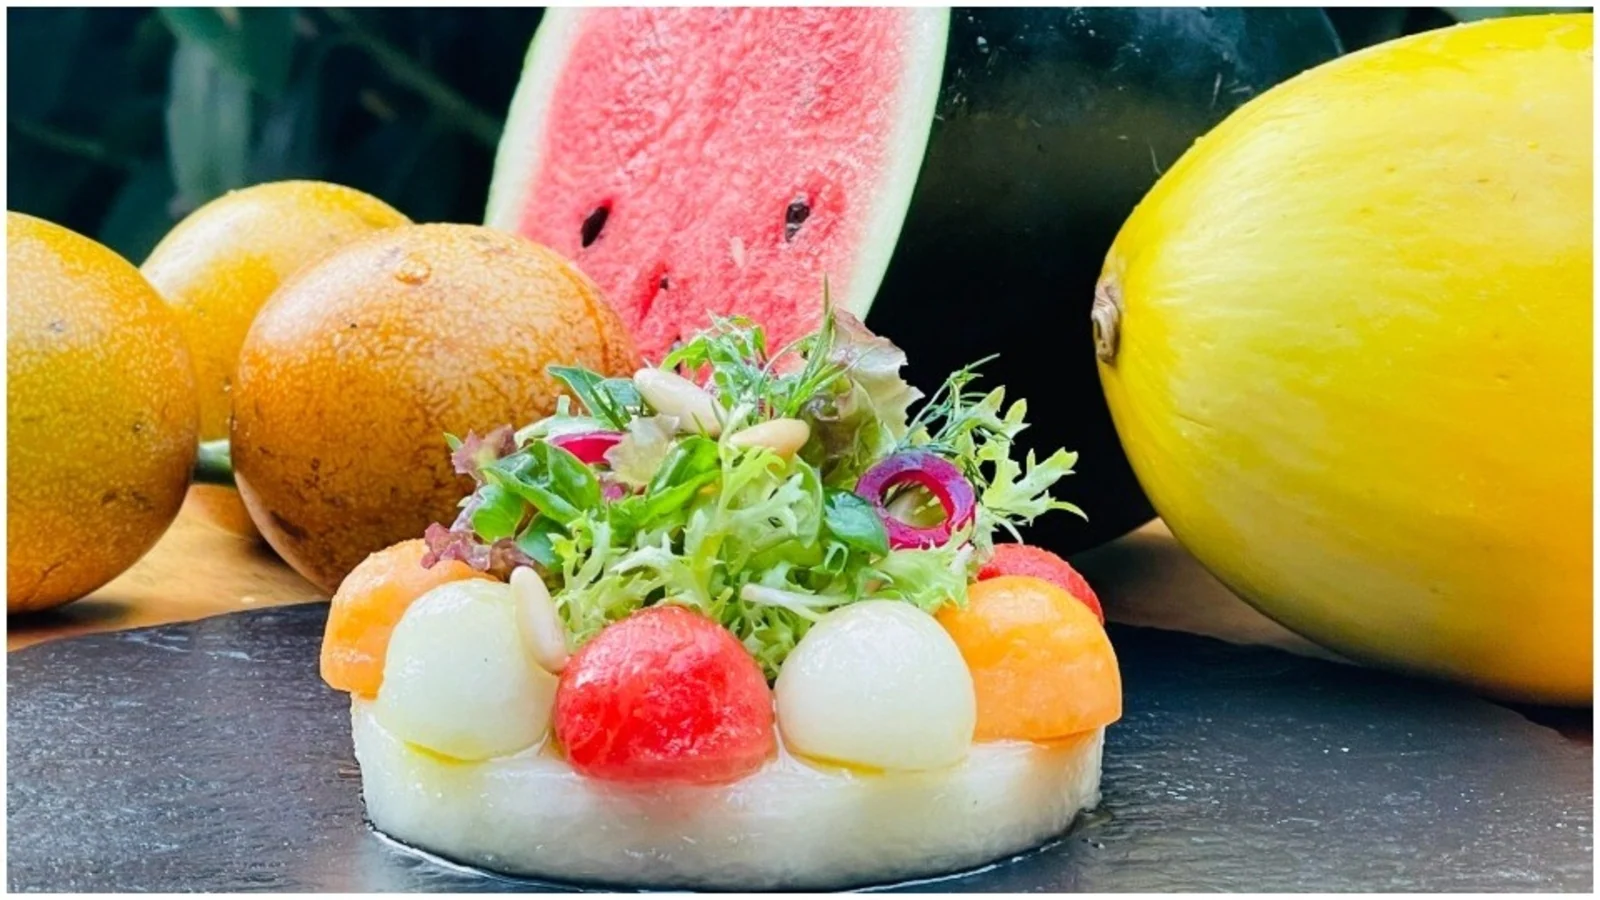 Hydrate yourself with Trio Melon Salad. Recipe inside